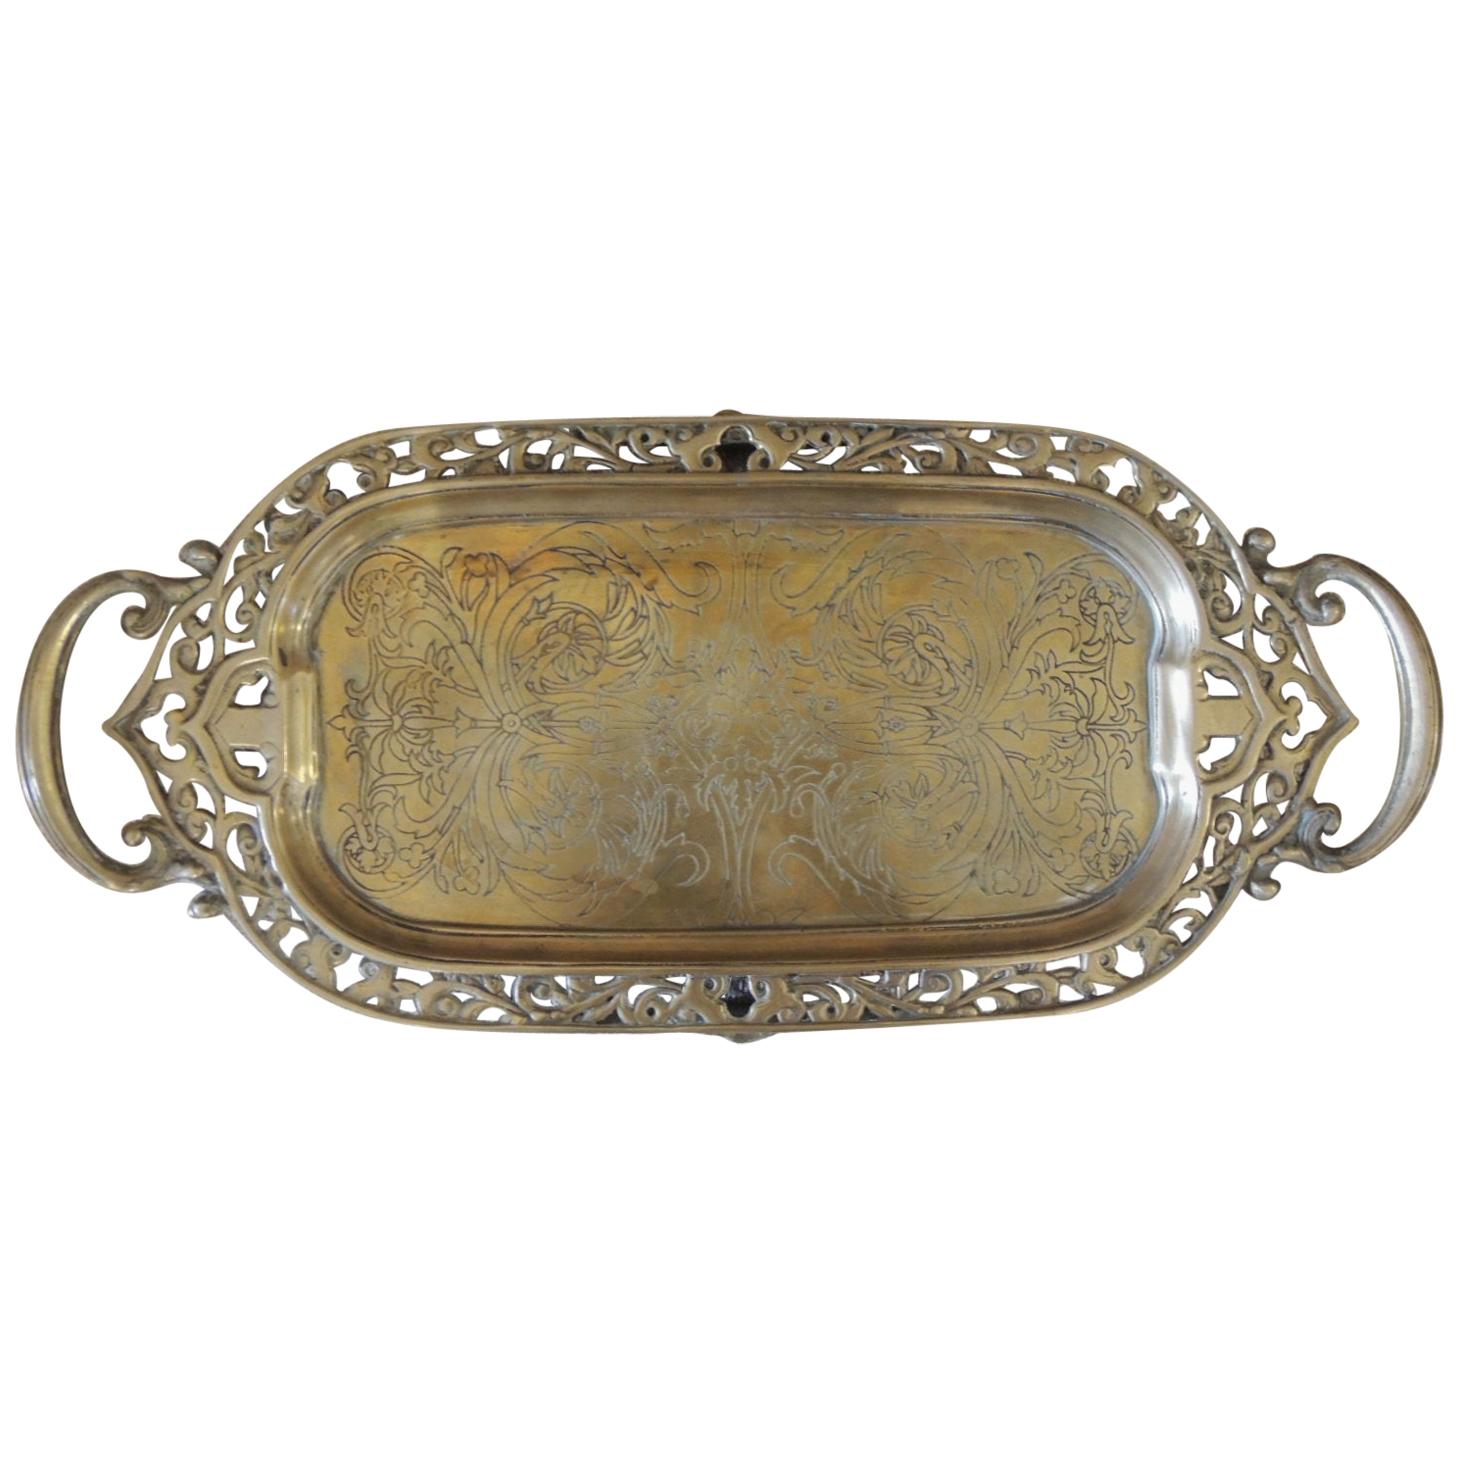 Vintage Oval Indian Brass Decorative Tray with Handles